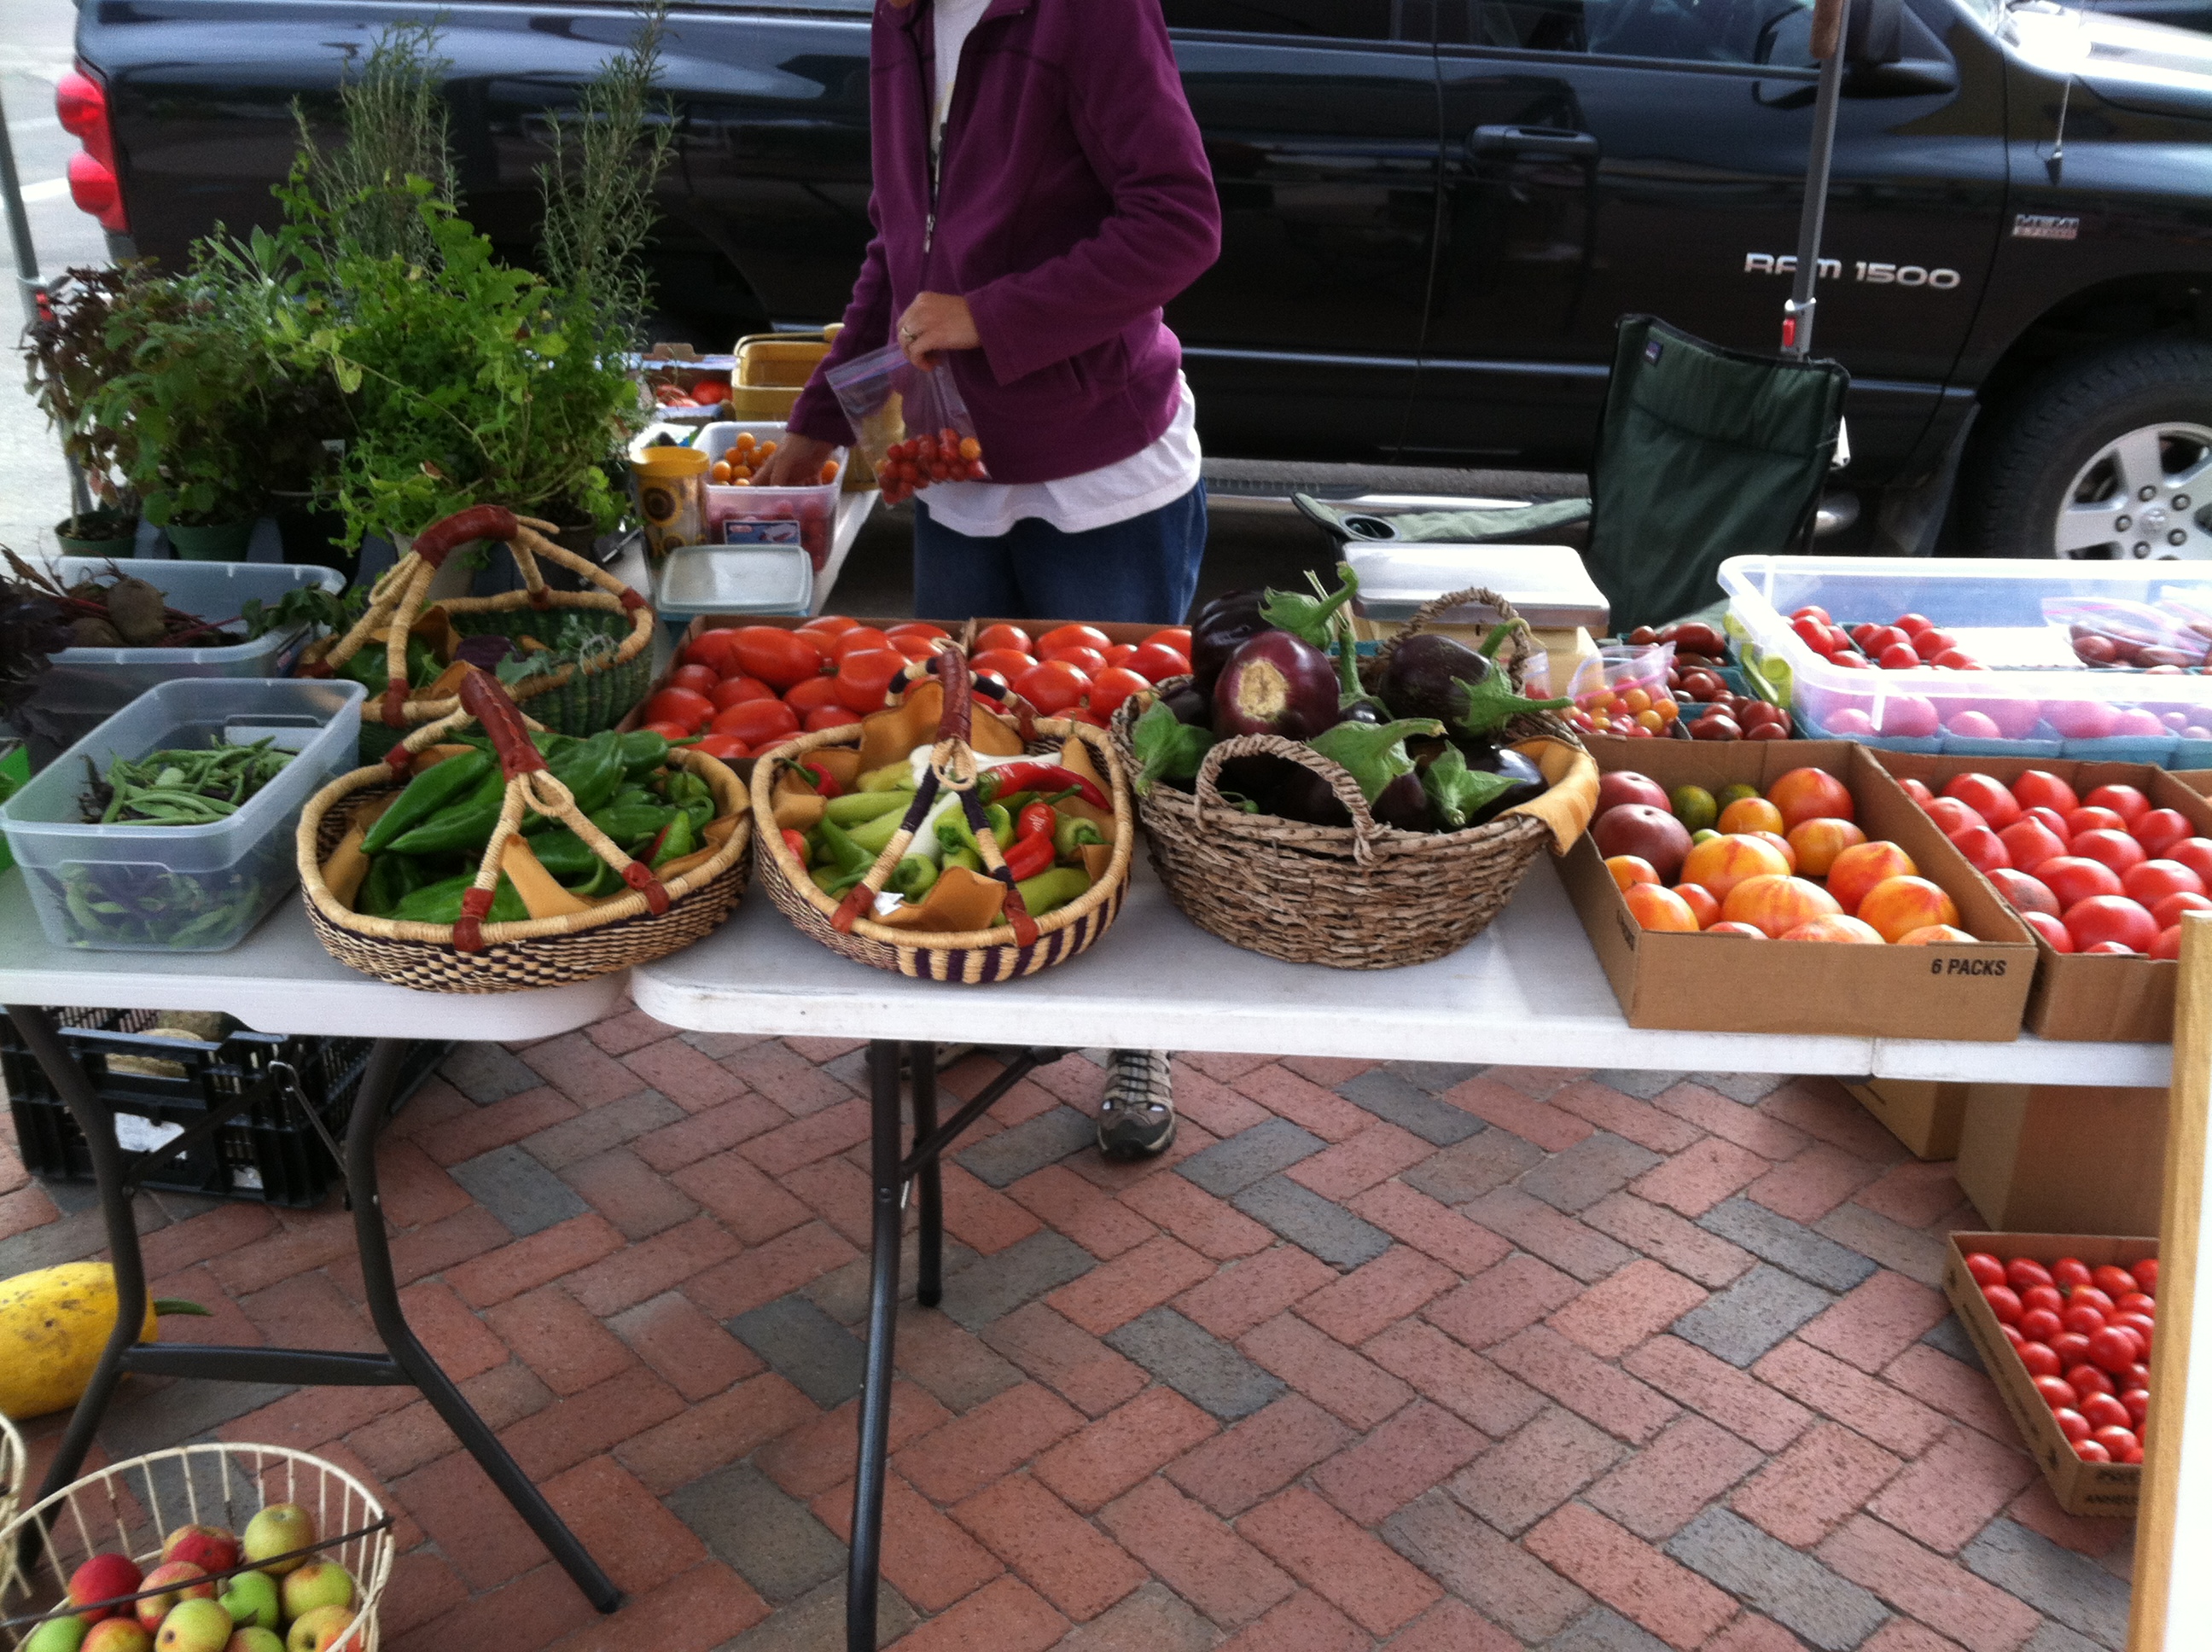 A table display of vegetables at a farmer's market.